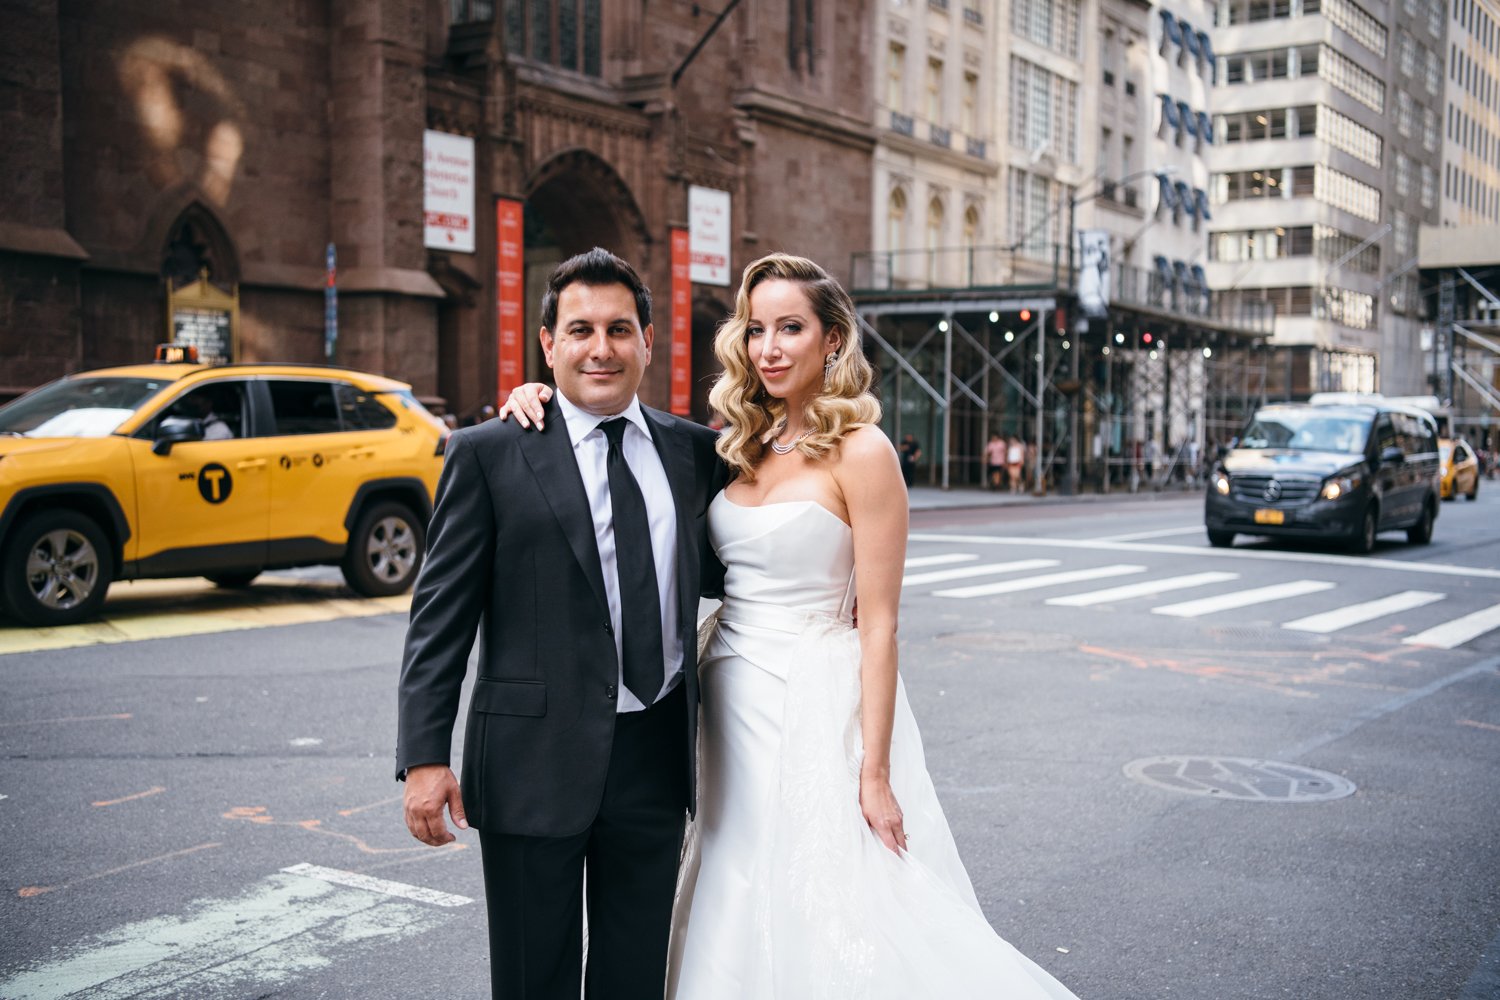 Bride and groom stand on a Manhattan street with arms around each other, both looking at the camera and smiling. Cars and taxis are driving along the street behind them.

Manhattan Luxury Wedding. New York Luxury Wedding Photographer. Wedding in Manhattan. NYC Luxury Wedding. Manhattan Bridal Portraits.